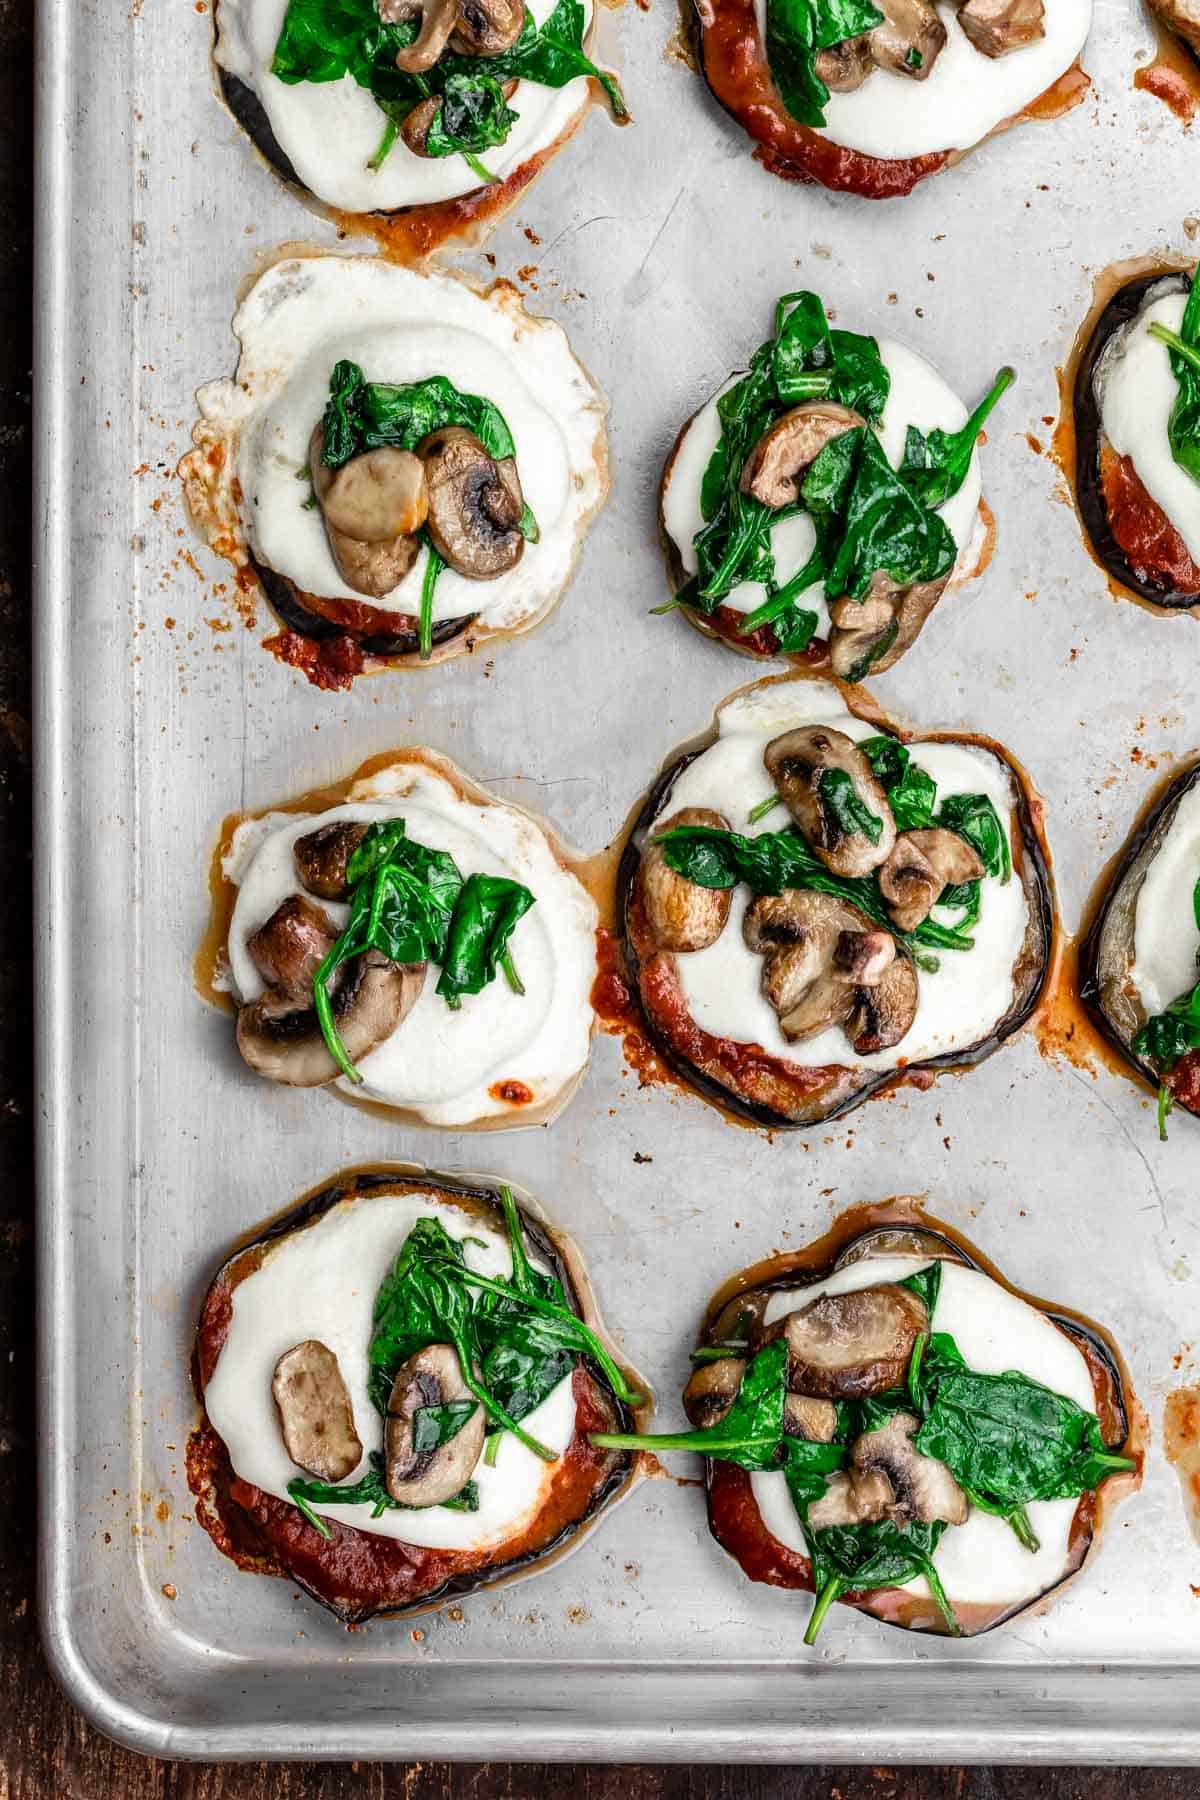 Roasted eggplant pizza with mozzarella, mushrooms and spinach.